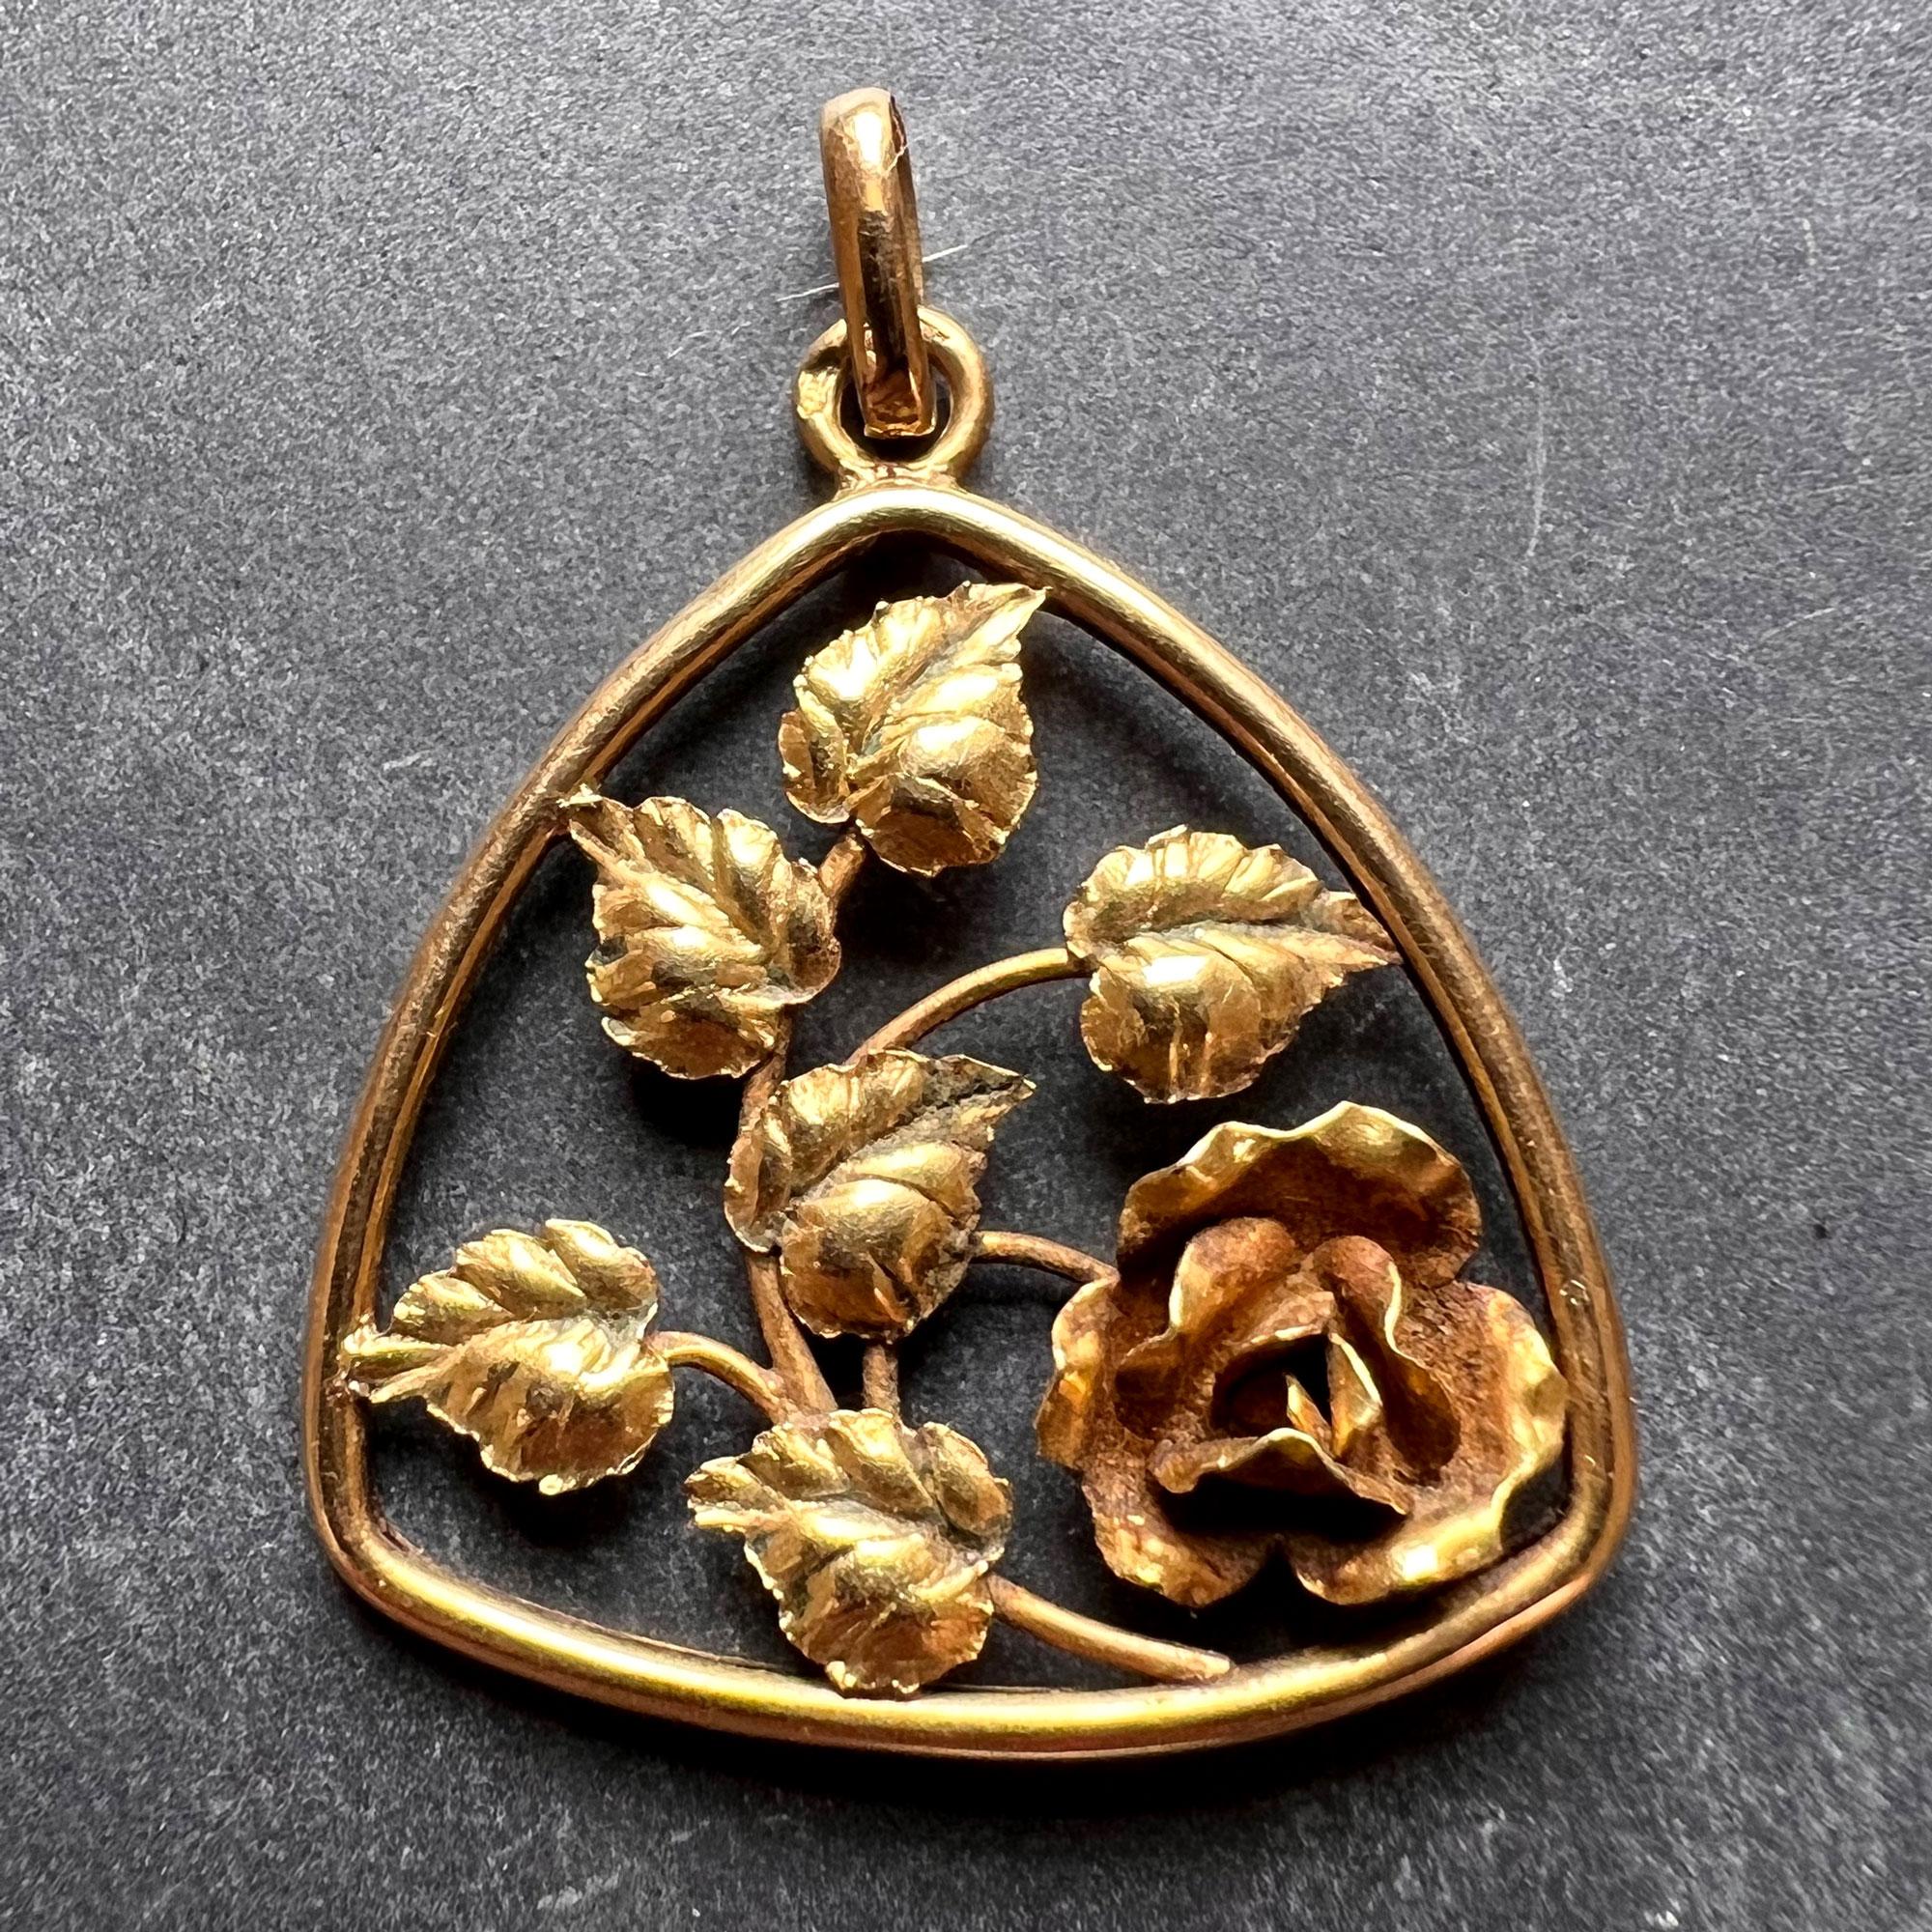 An 18 karat (18K) yellow gold charm pendant designed as a rounded triangular frame containing a realistically modelled rose. Stamped with the eagle’s head for French manufacture and 18 karat gold and an unknown makers’ mark.

Dimensions: 2.5 x 2.3 x